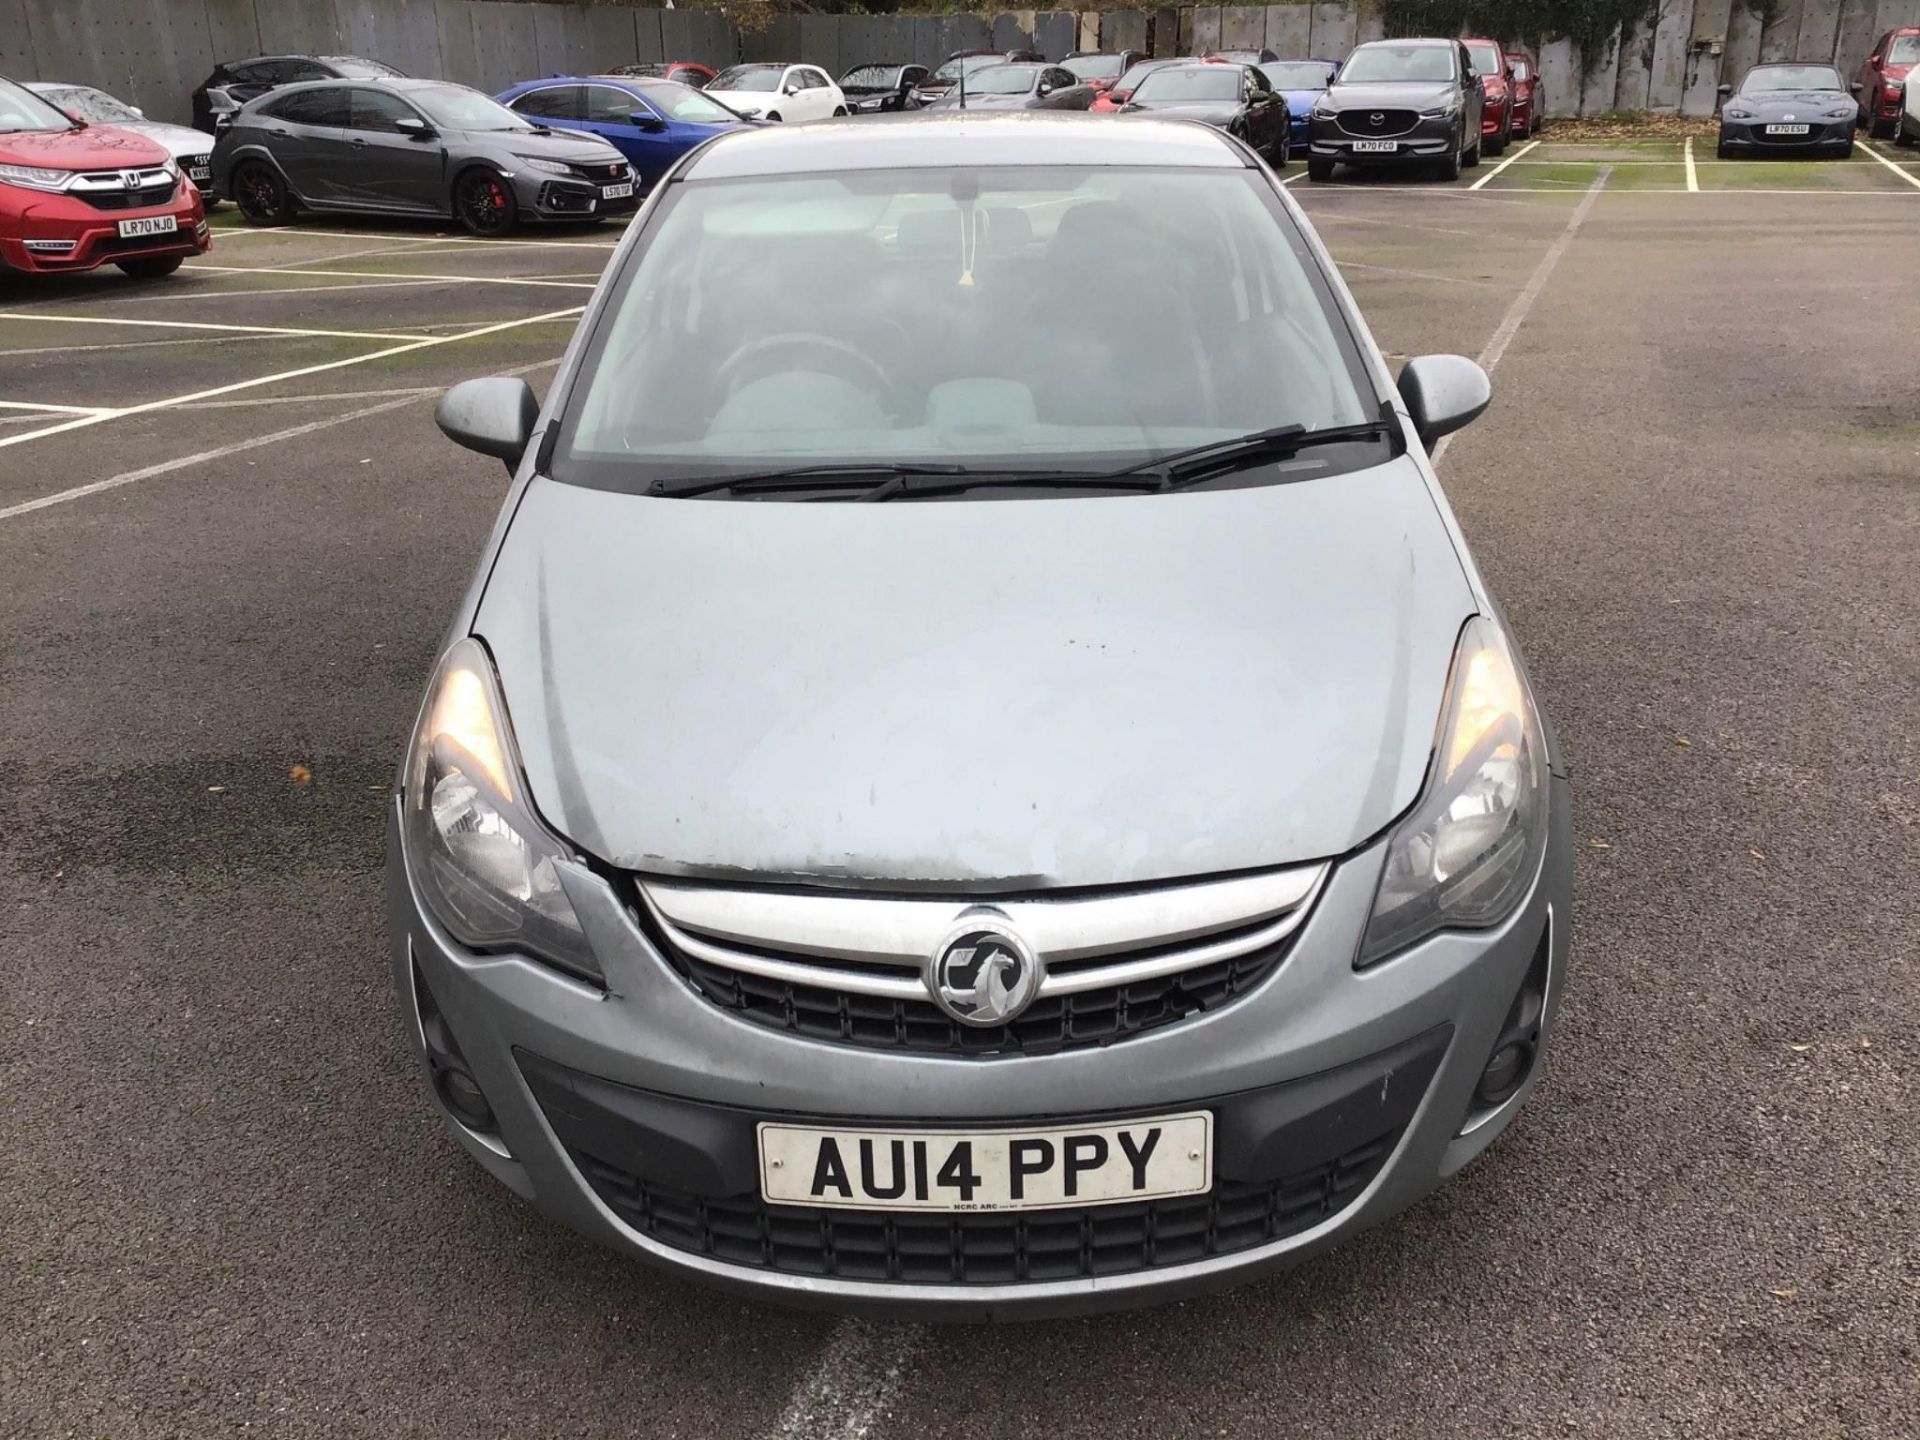 2014 Vauxhall Corsa 1.2 Excite 3 Door Hatchback - CL505 - NO VAT ON THE HAMMER - Location: Corby, - Image 2 of 13